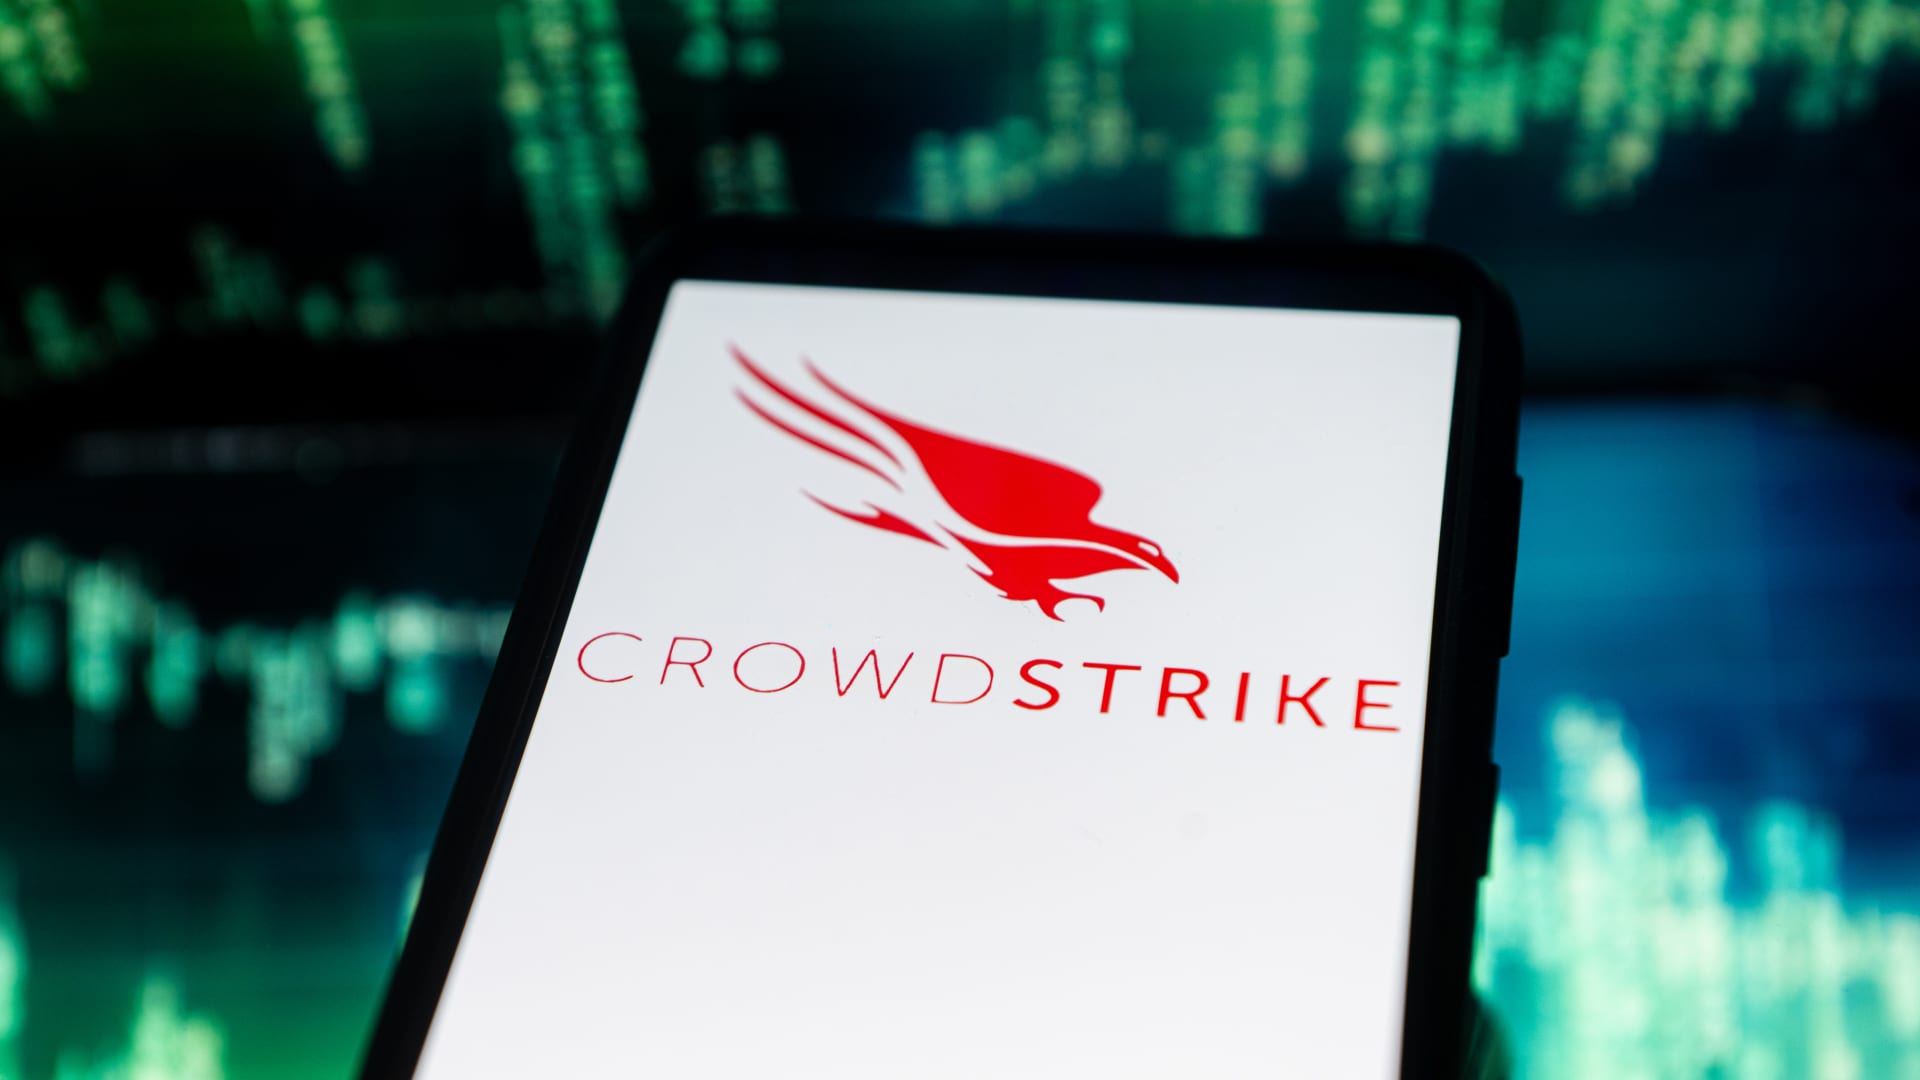 Microsoft, CrowdStrike shares drop after major IT outage